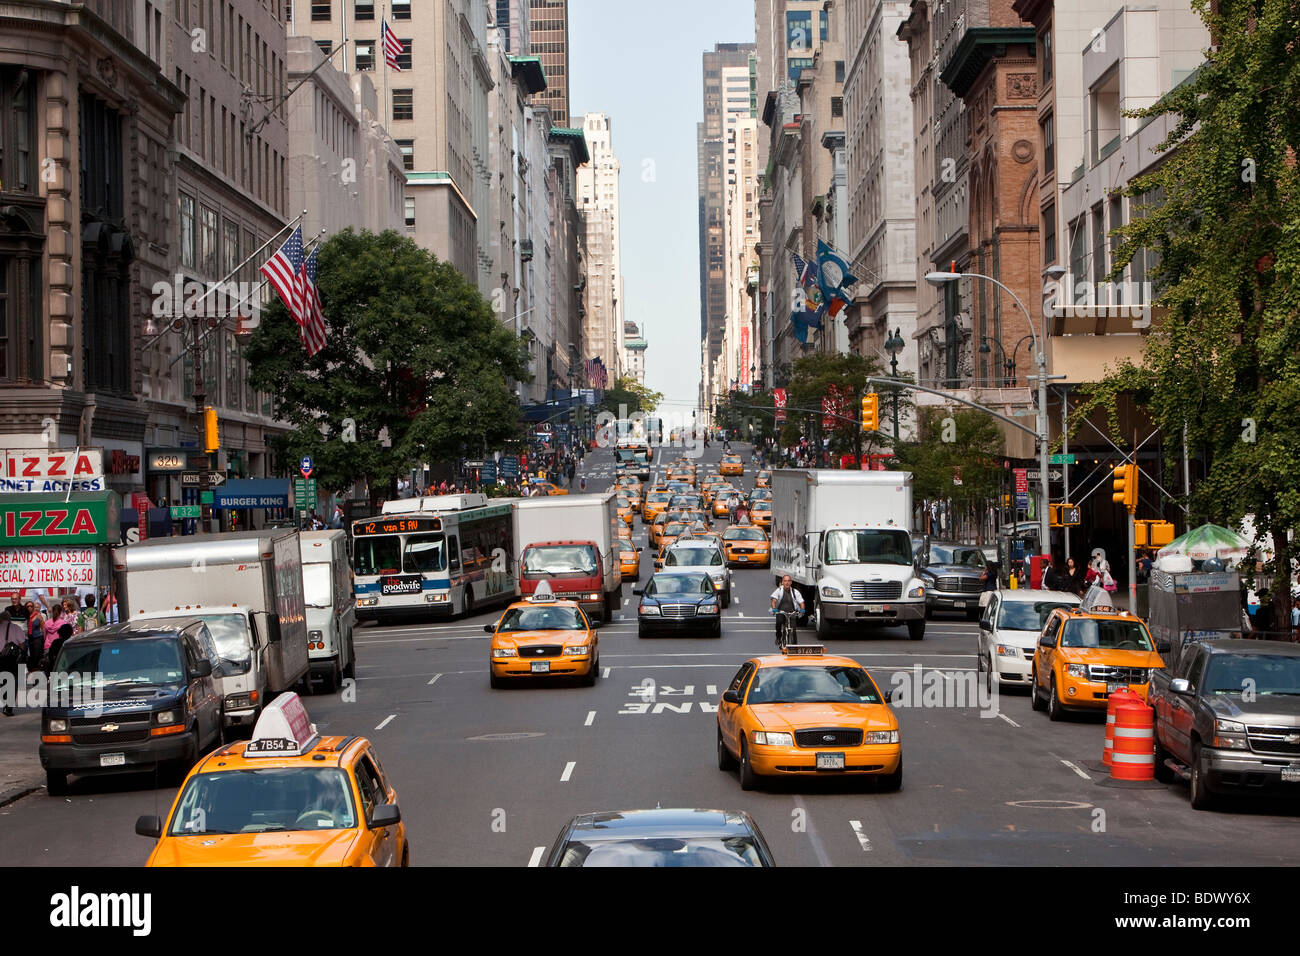 Midday on 5th Avenue - New York City Streets Stock Photo